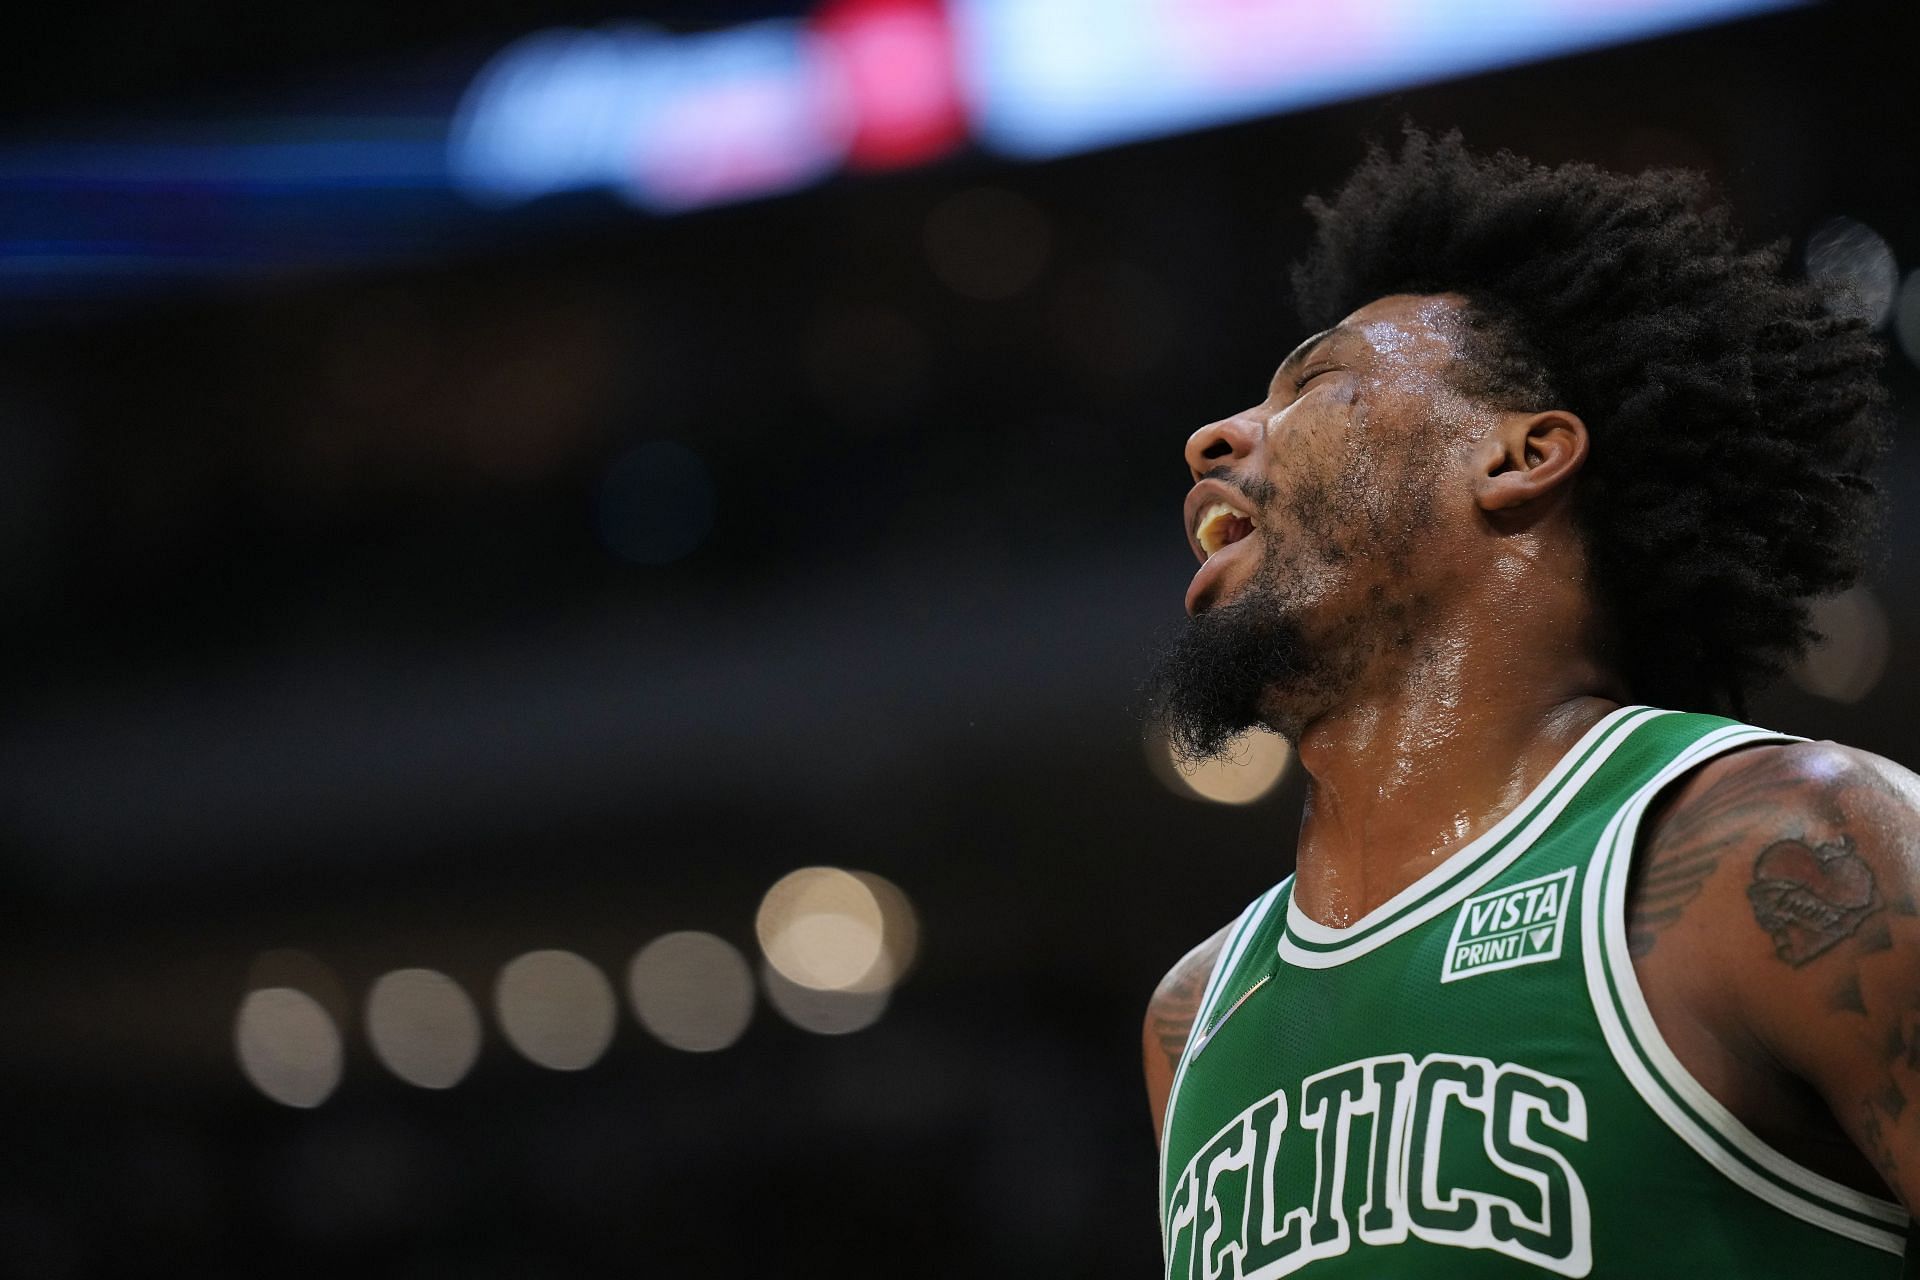 Boston Celtics guard Marcus Smart is heating up in the Defensive Player of the Year race